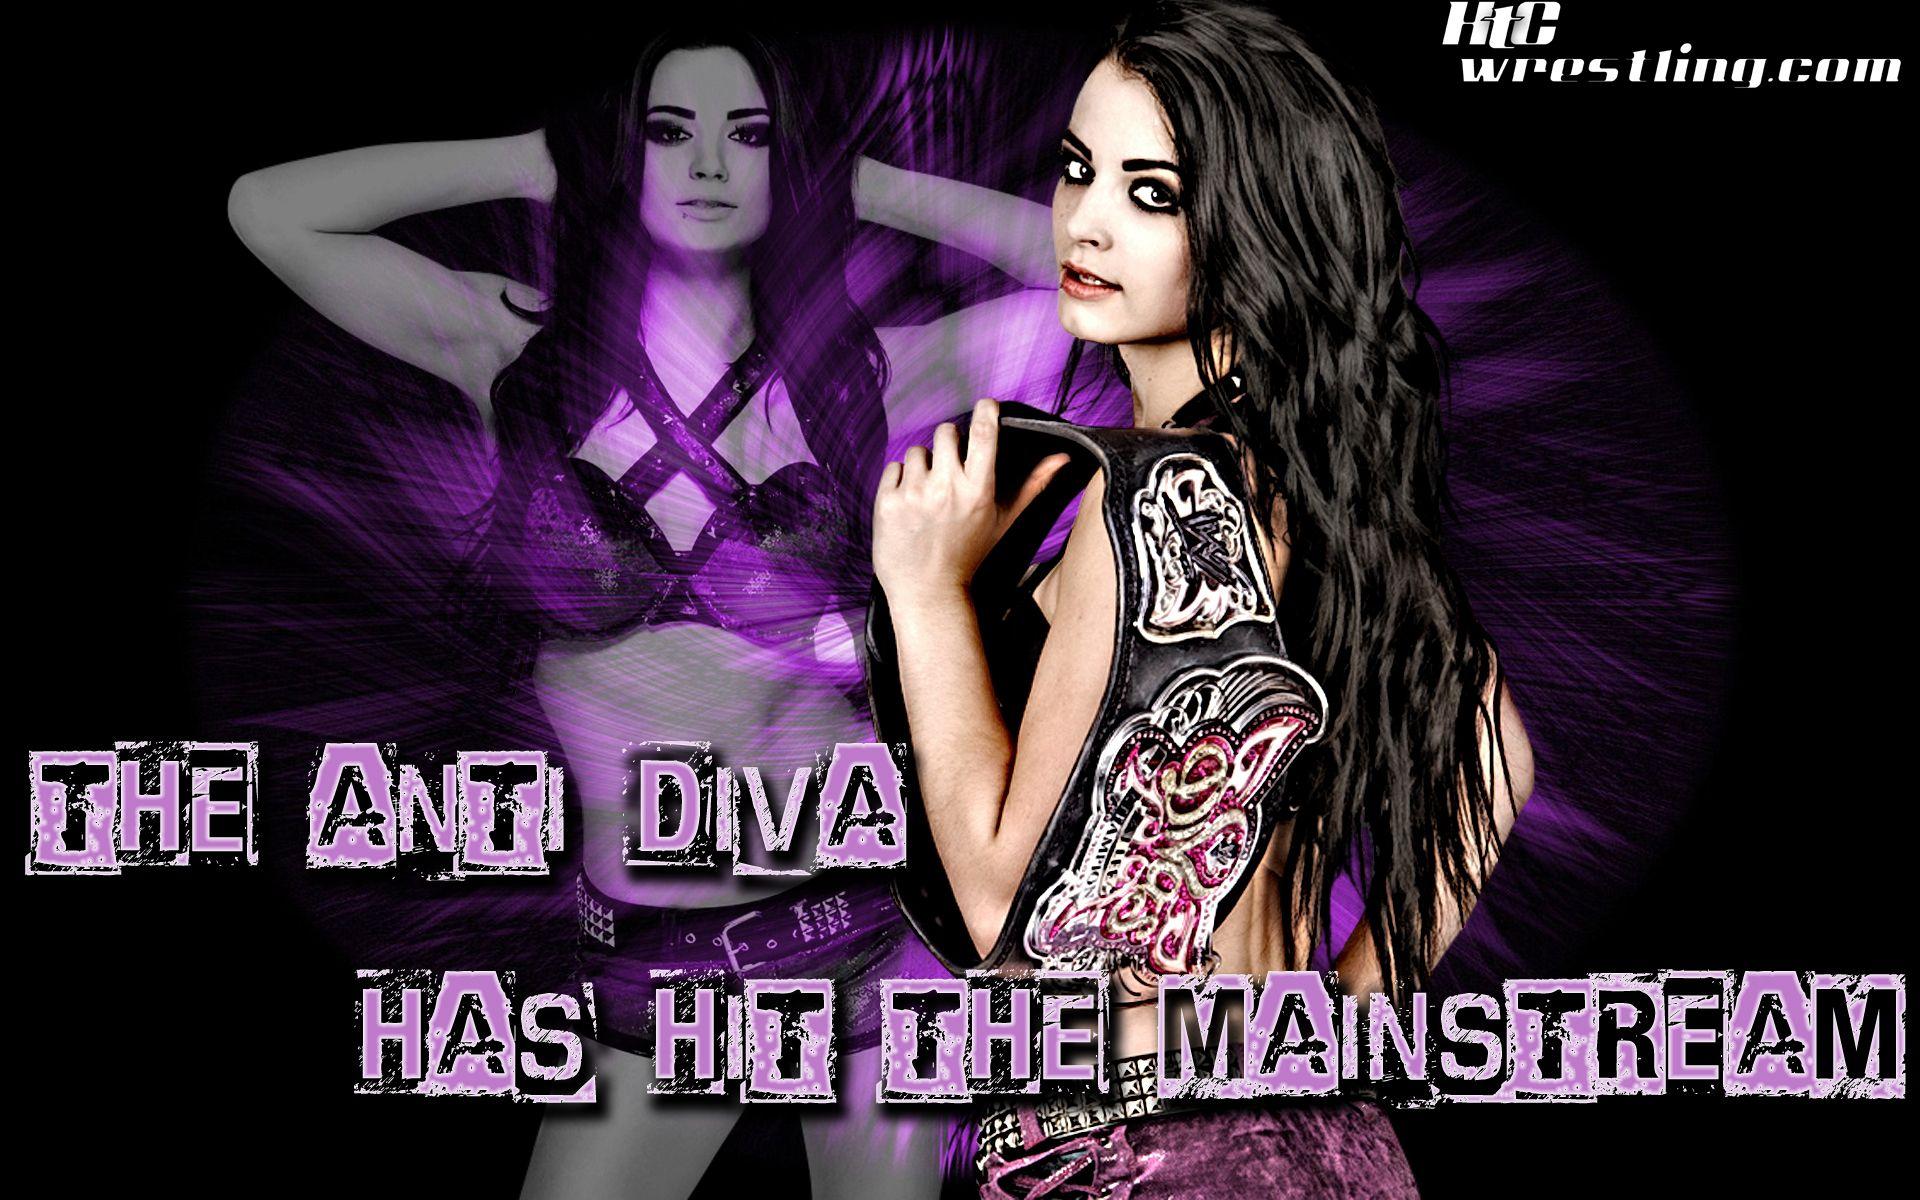 Wallpaper Of The Week: Paige “The Anti Diva” Arrives